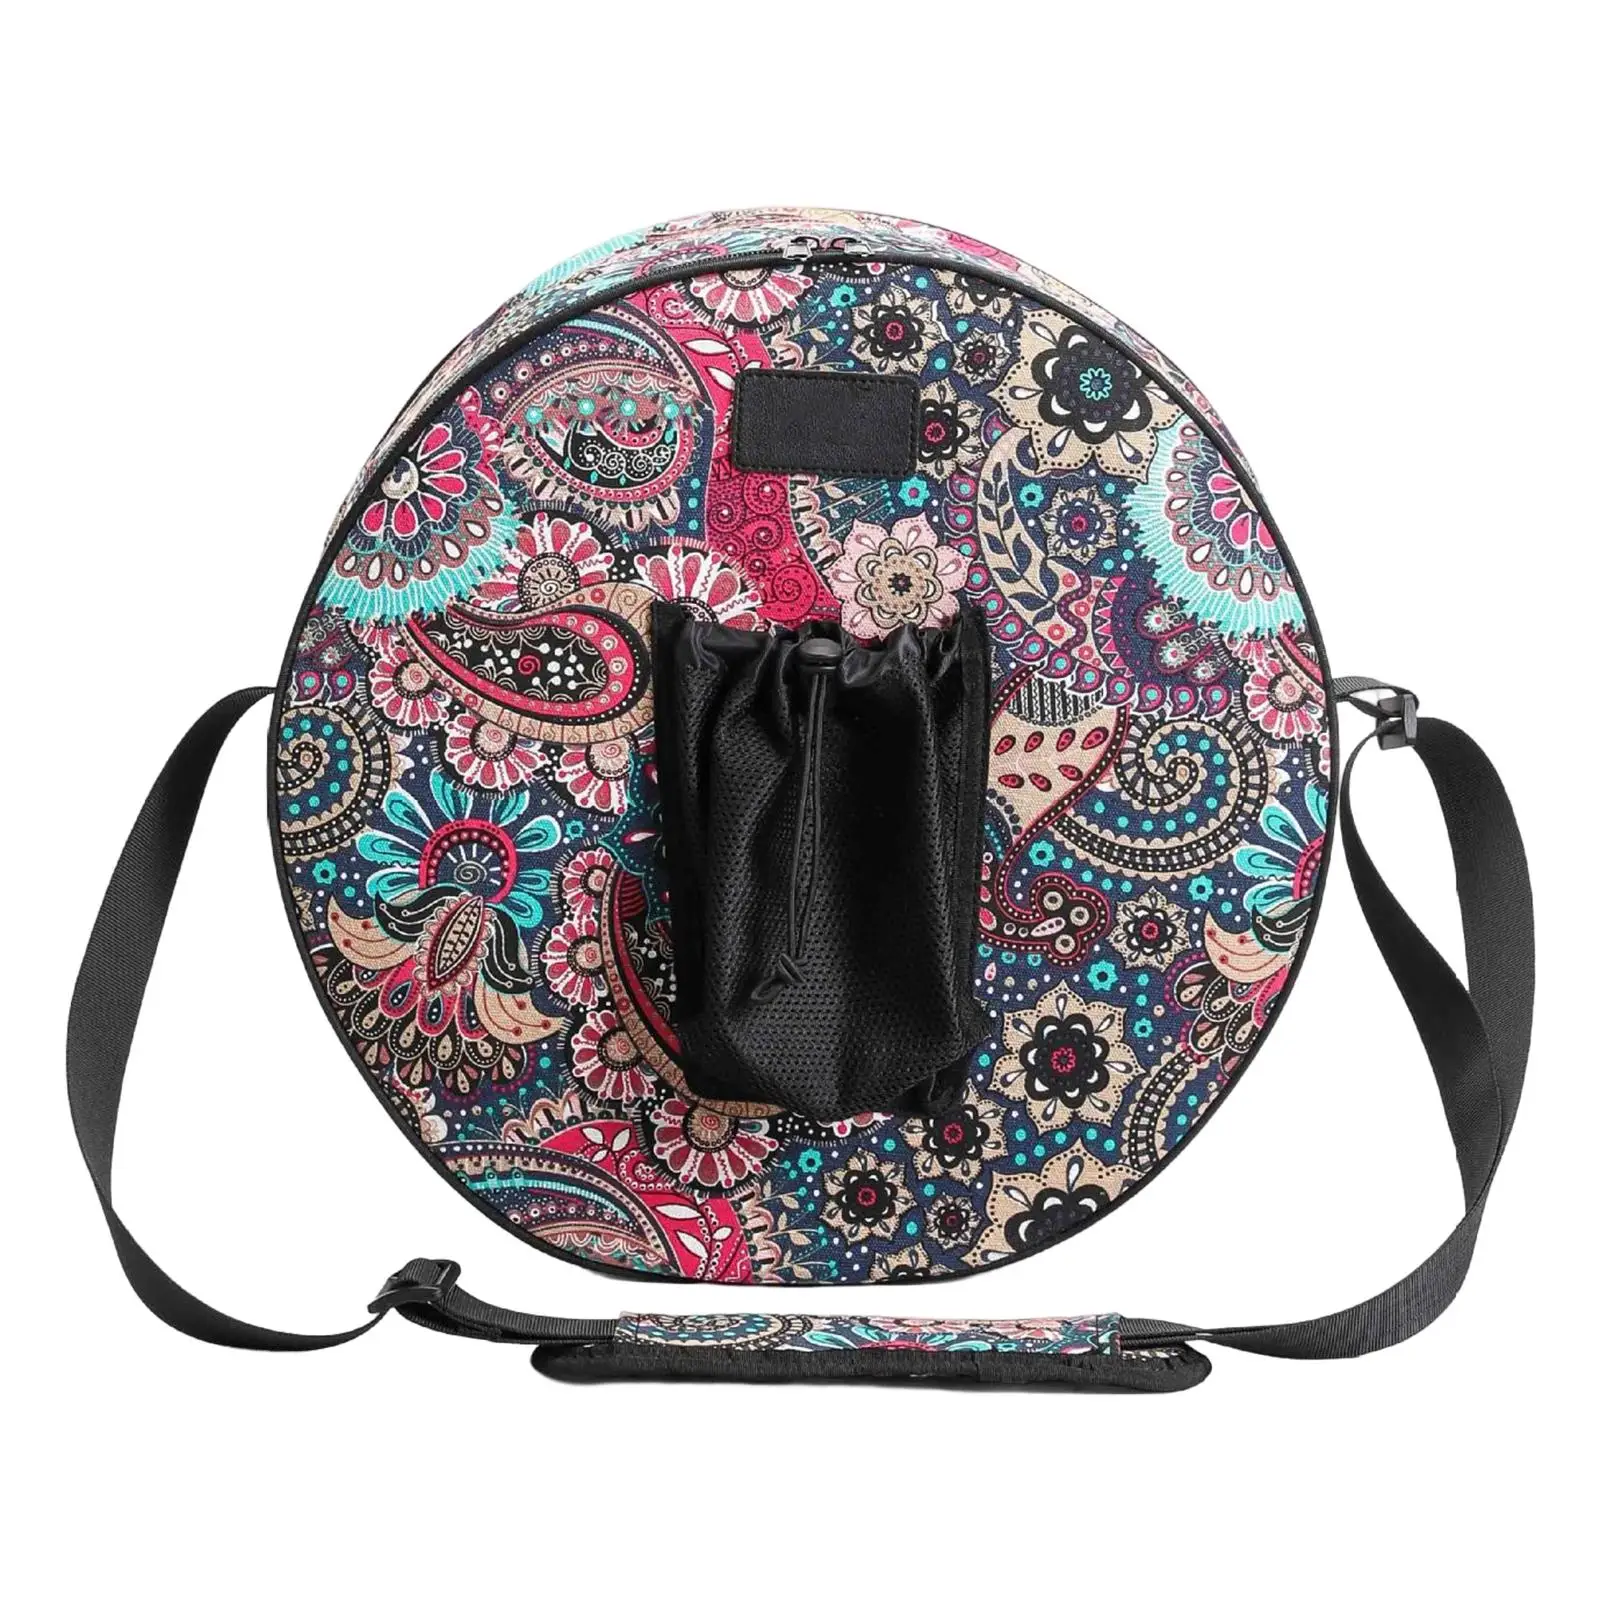 lifestyling2020 Wheel Bag Large Capacity with Pockets Shoulder Yoga Clothes